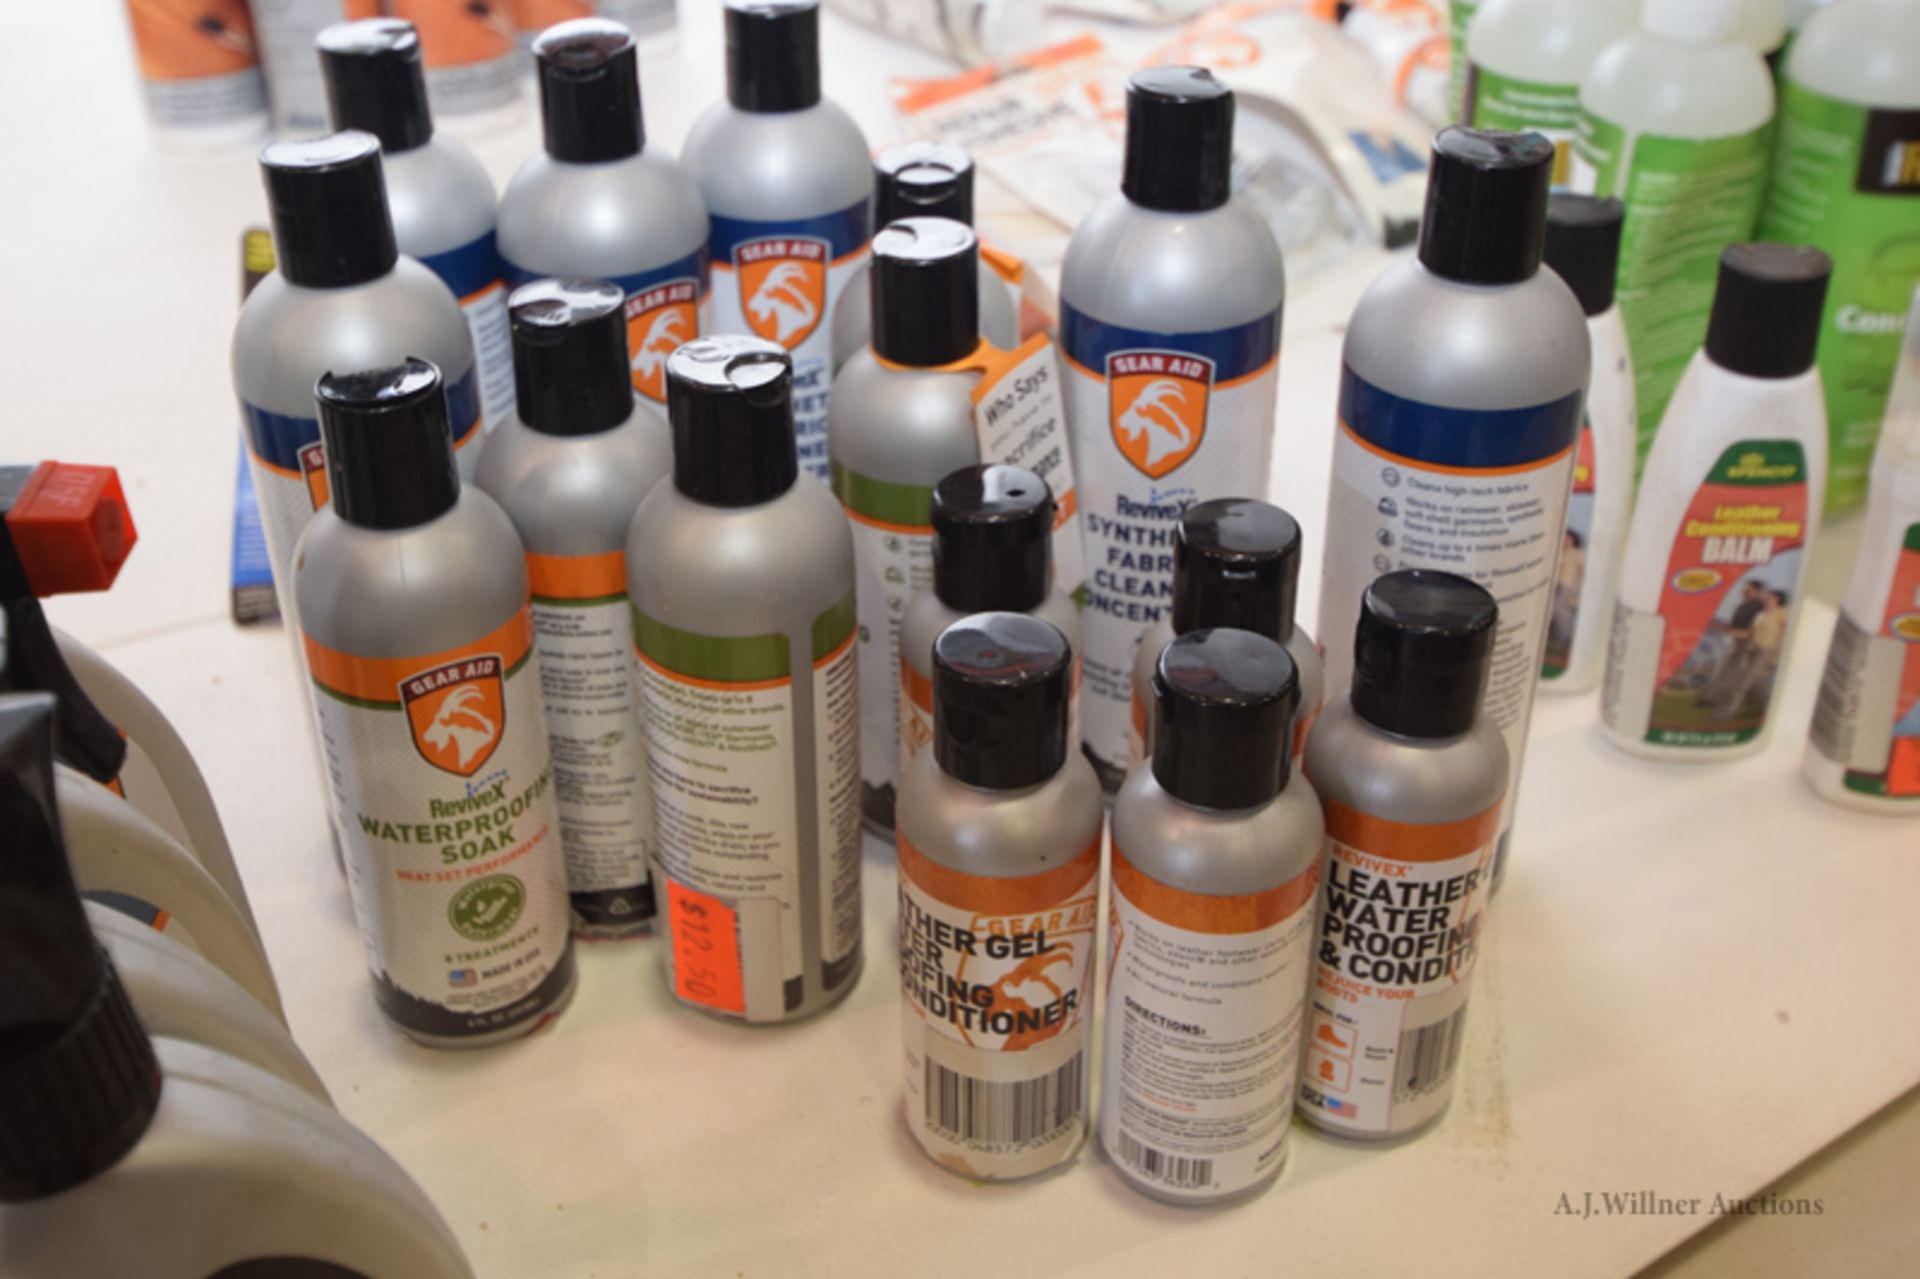 water repellents, fabric cleaners, seam sealers, stain repellent, leather conditioning approx 150pcs - Image 11 of 15